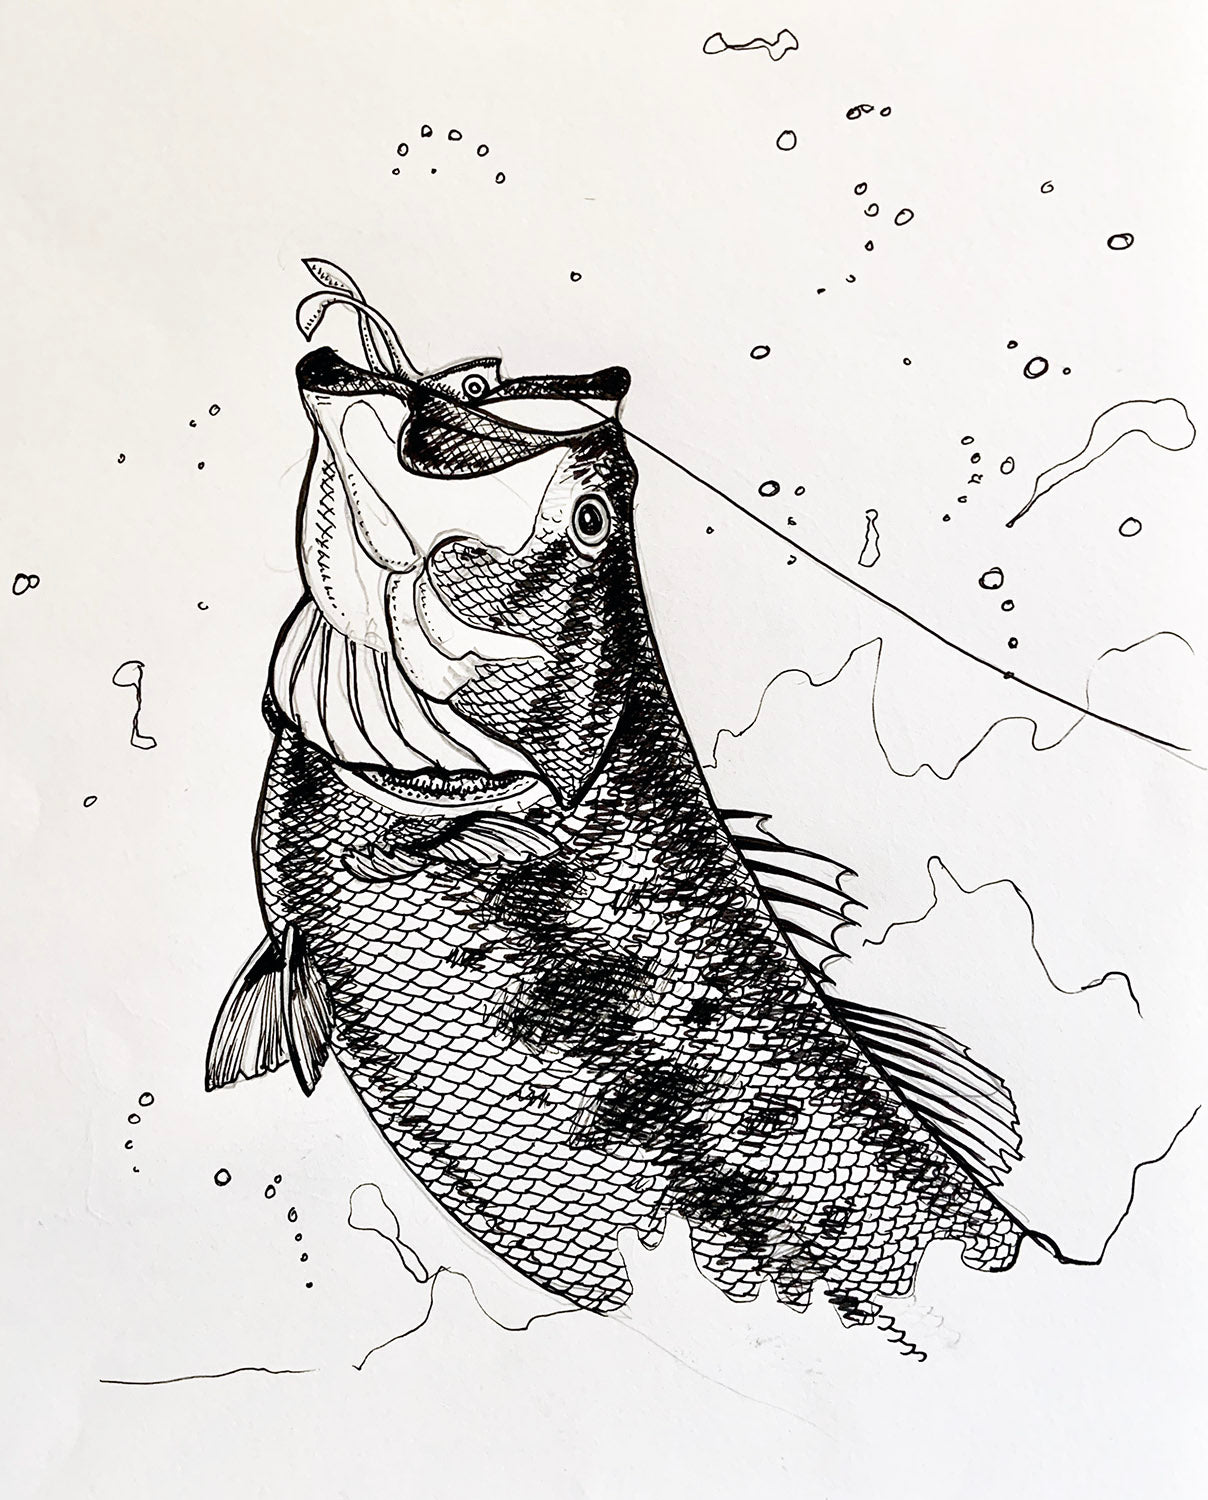 This One-of-a-Kind Original Ink Drawing of a Largemouth Bass